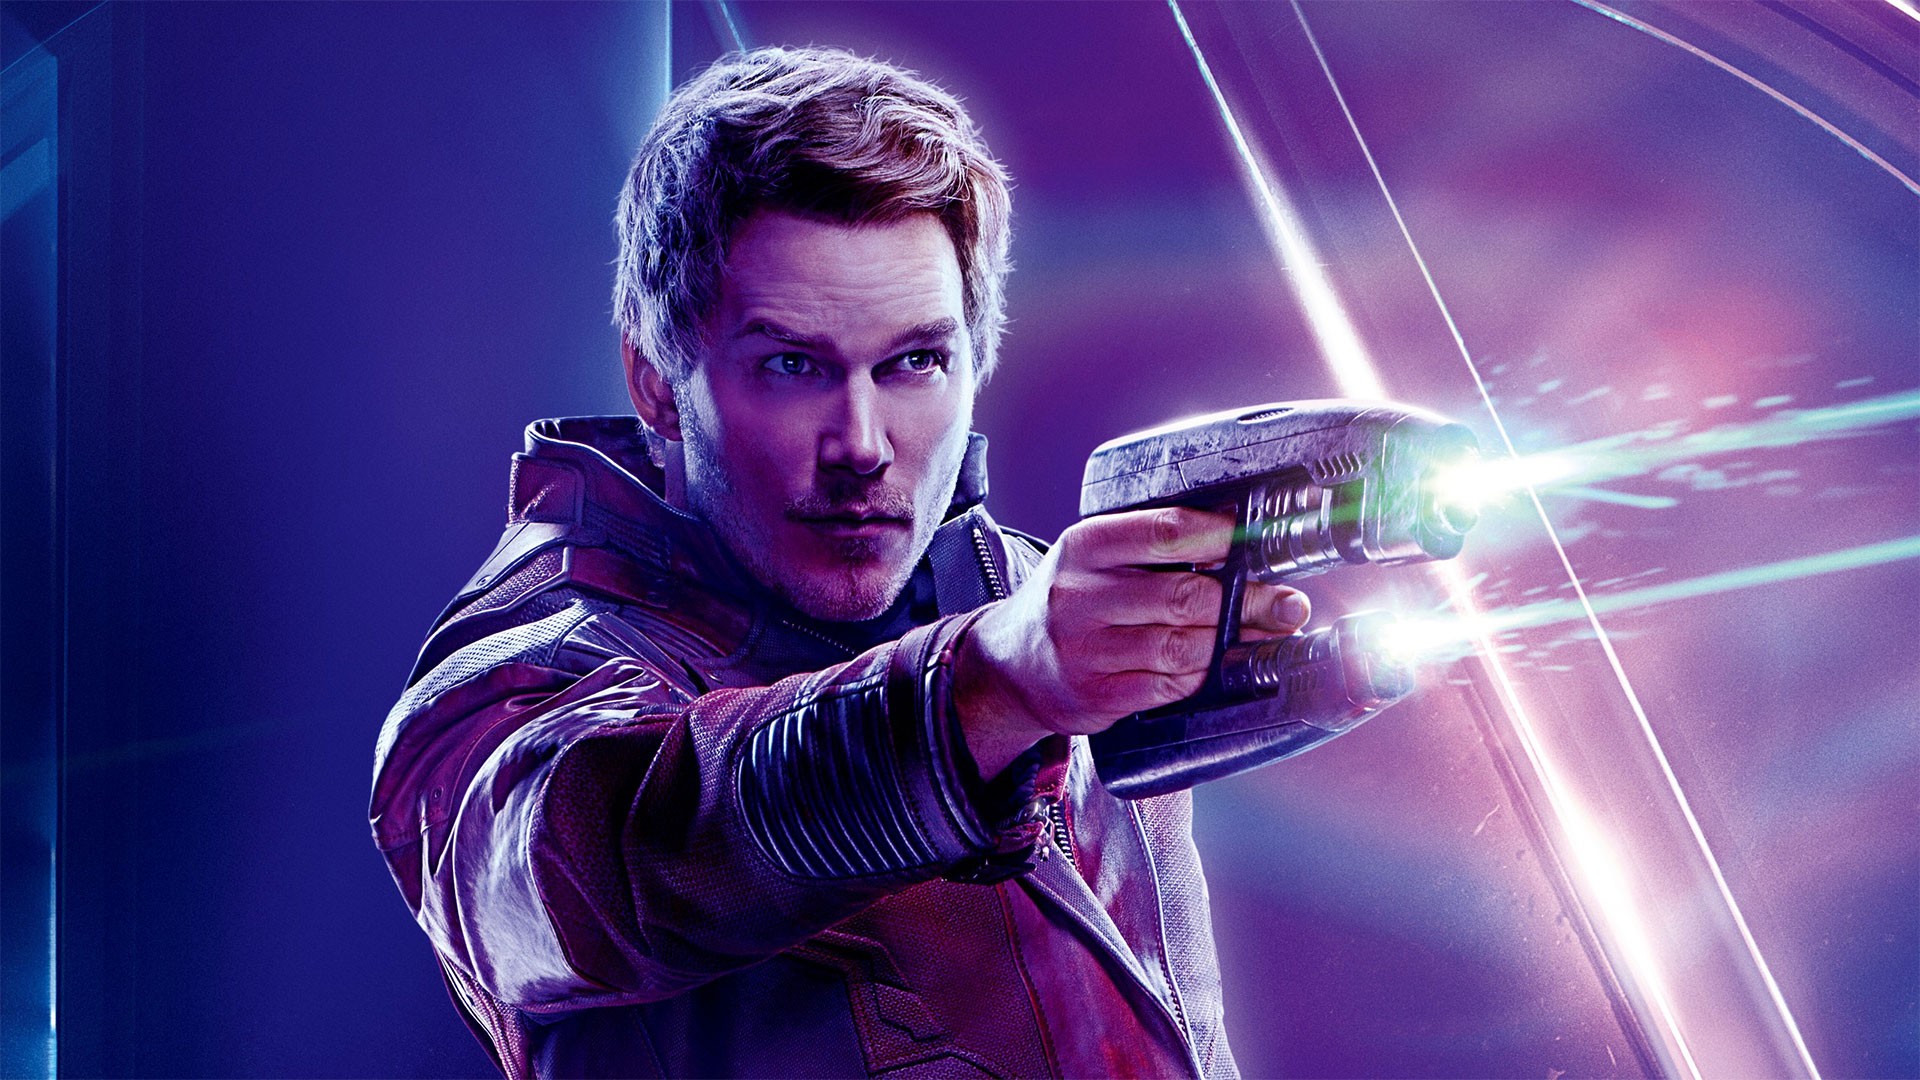 Star Lord Avengers Endgame Wallpaper HD with high-resolution 1920x1080 pixel. You can use this poster wallpaper for your Desktop Computers, Mac Screensavers, Windows Backgrounds, iPhone Wallpapers, Tablet or Android Lock screen and another Mobile device